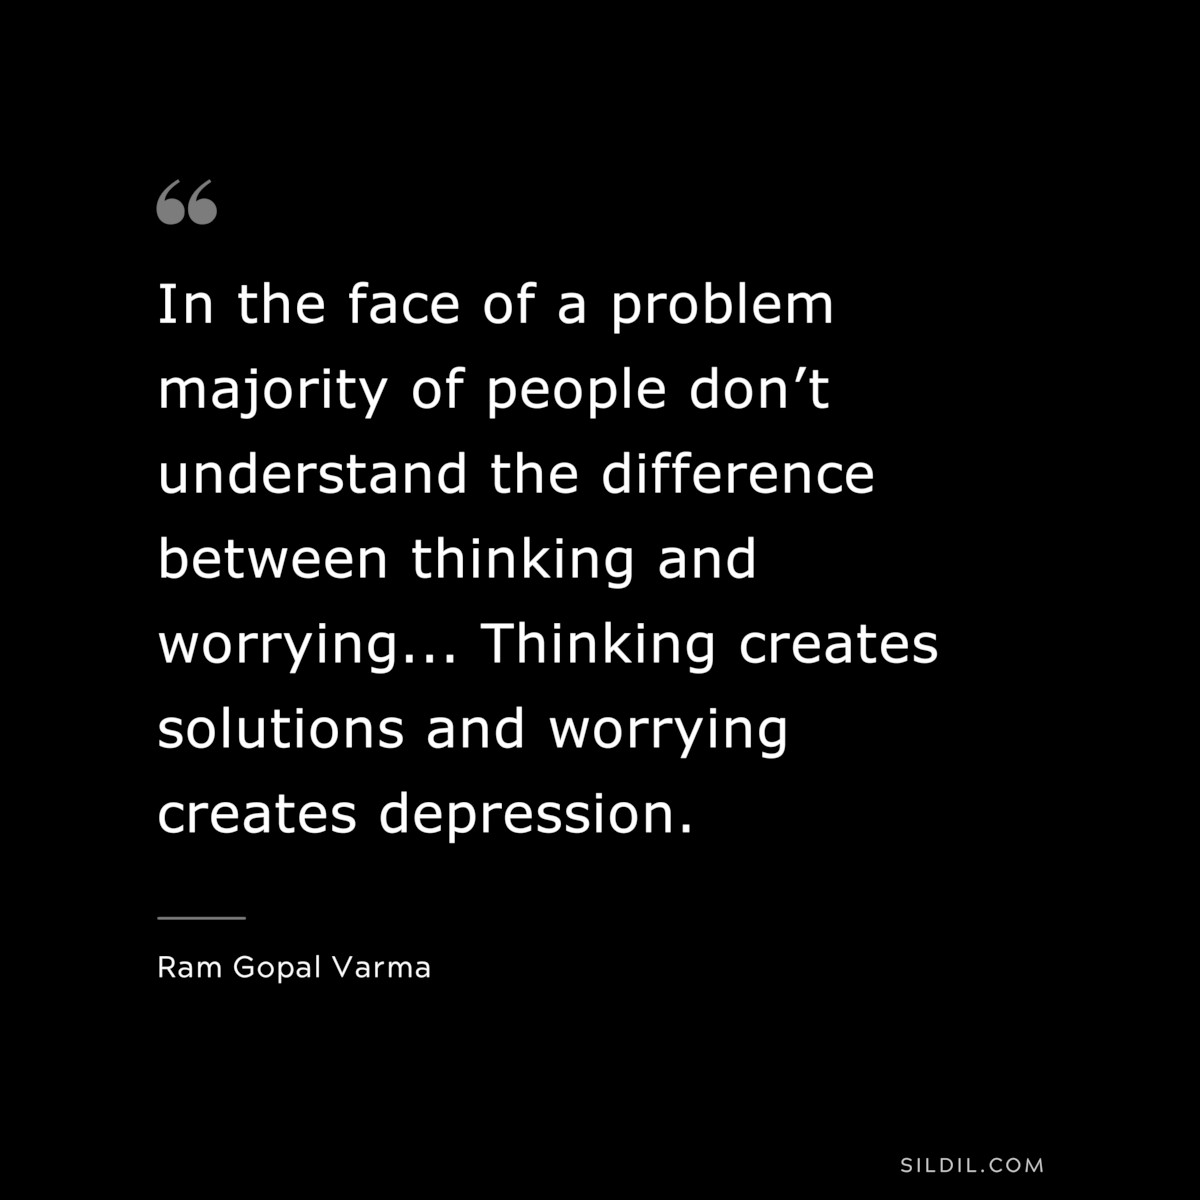 In the face of a problem majority of people don’t understand the difference between thinking and worrying... Thinking creates solutions and worrying creates depression. ― Ram Gopal Varma